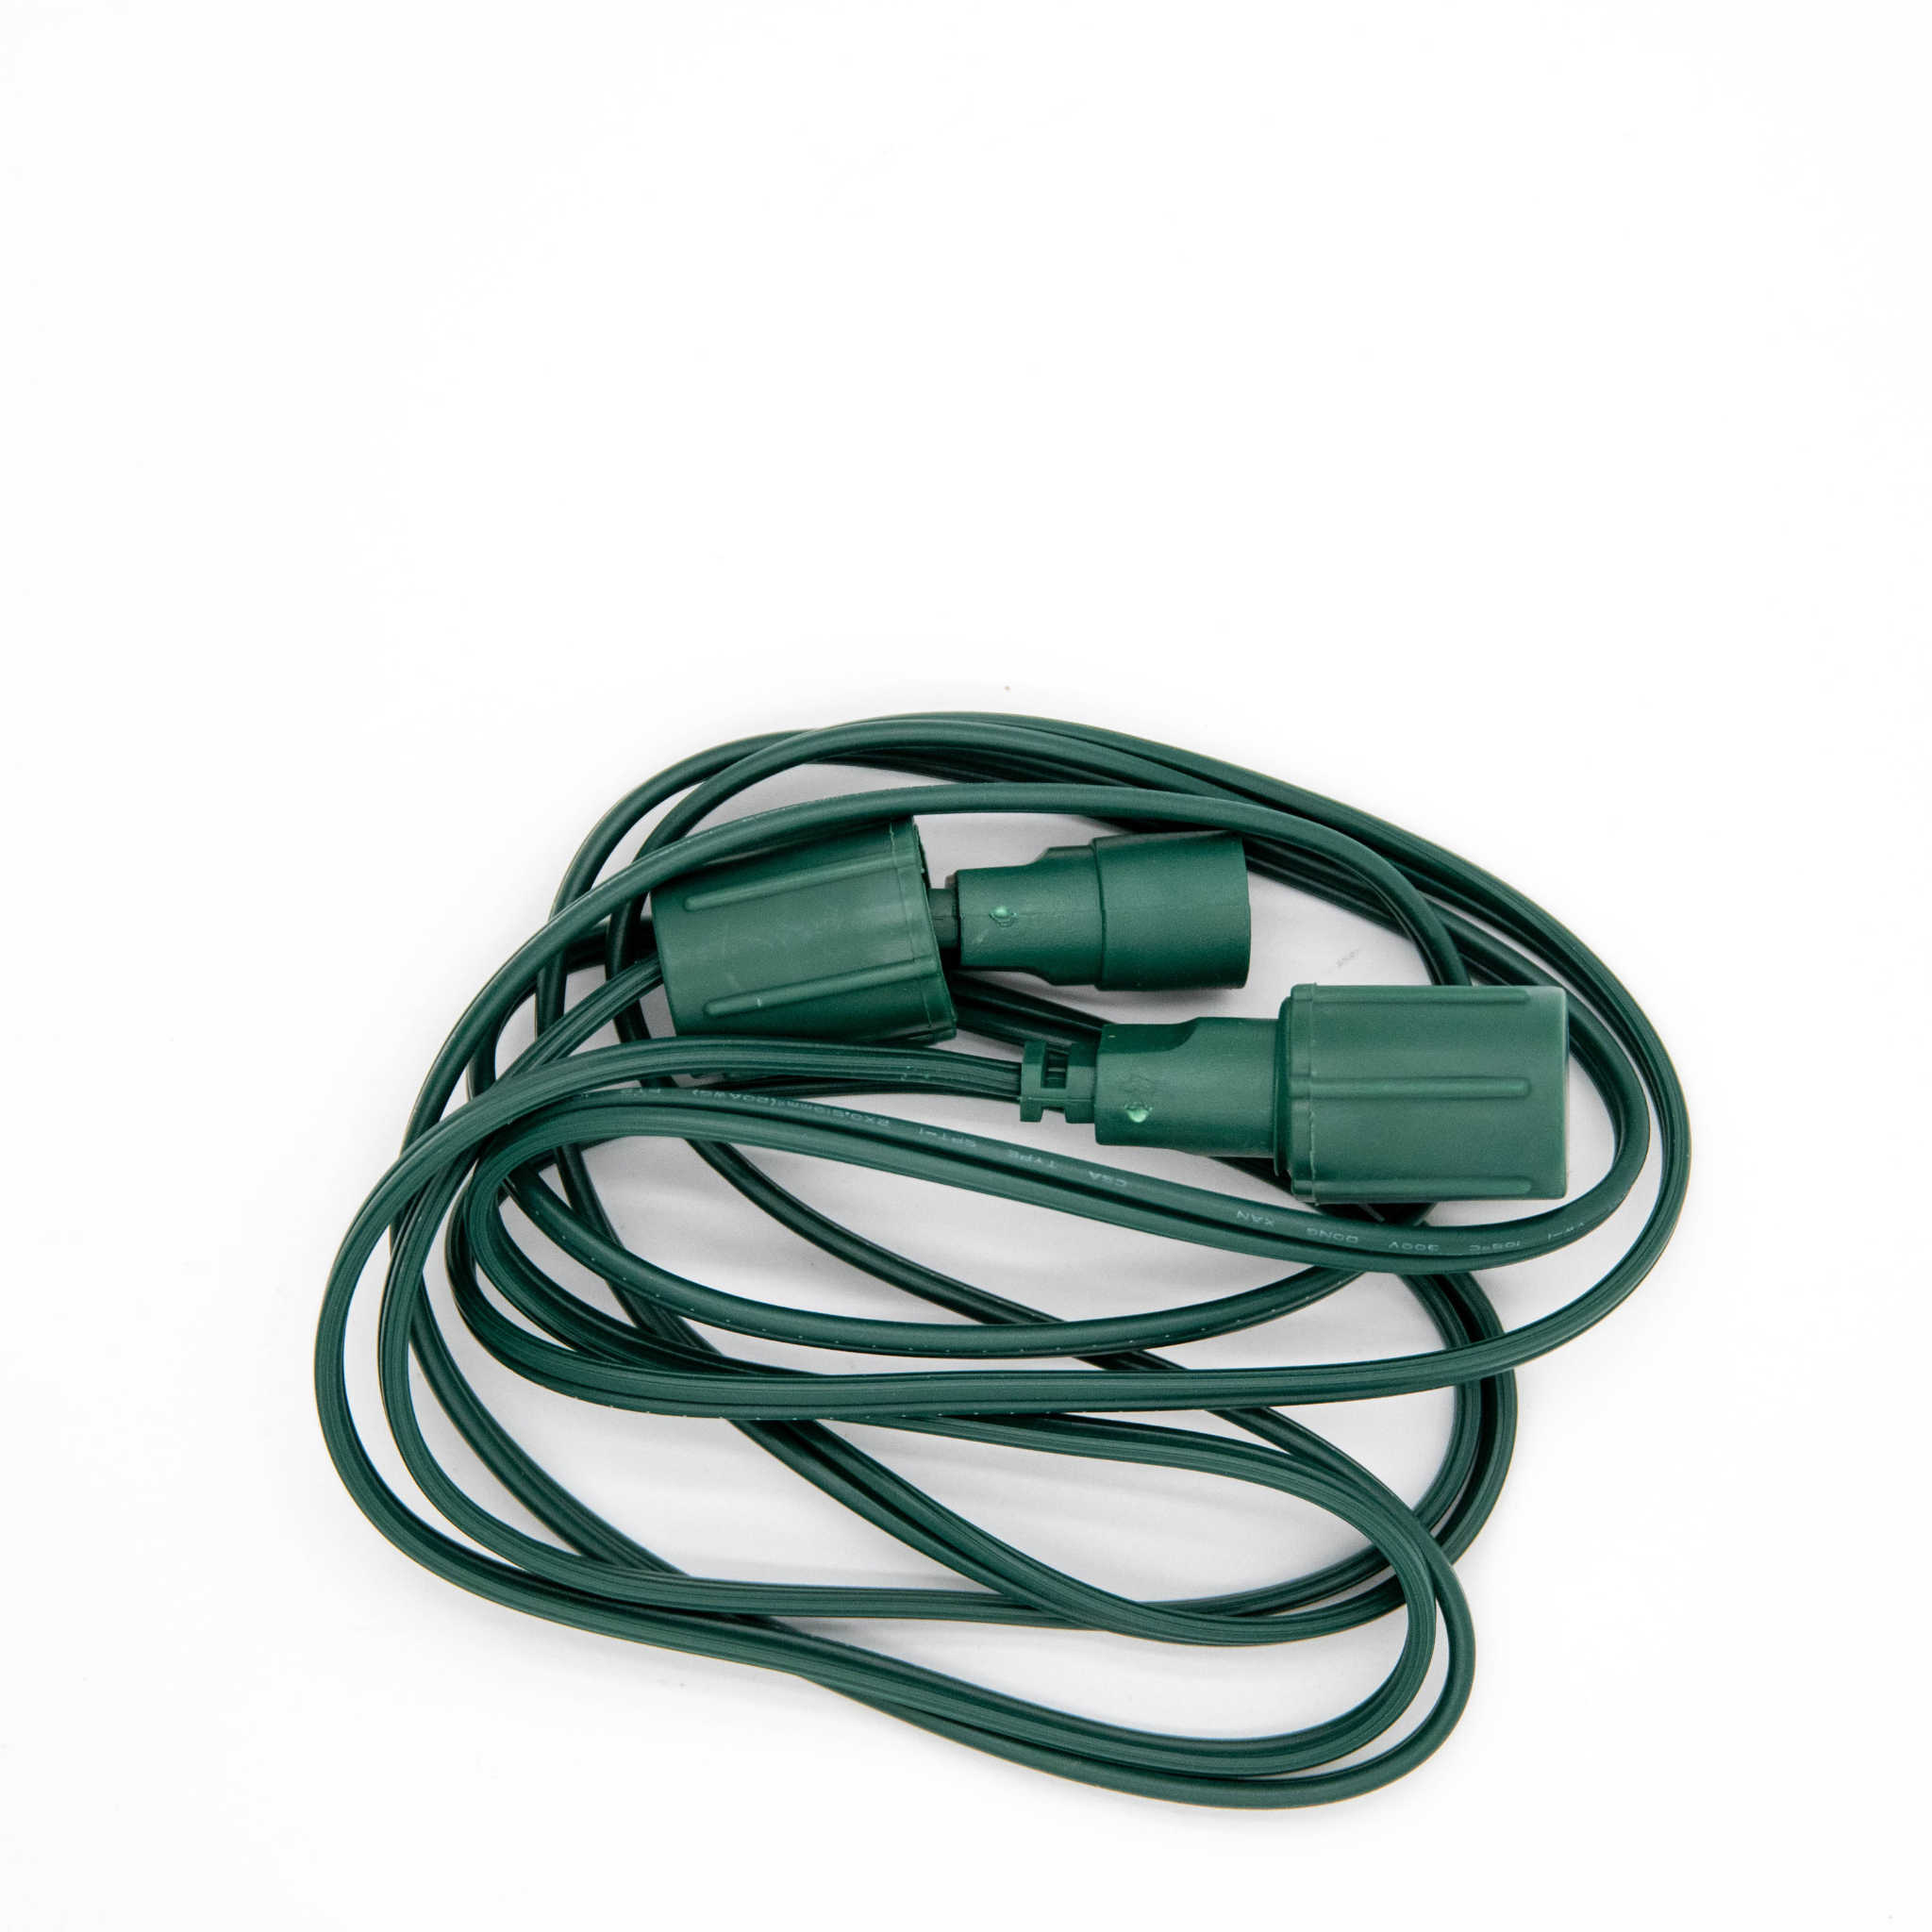 50 foot Coaxial Extension Cord